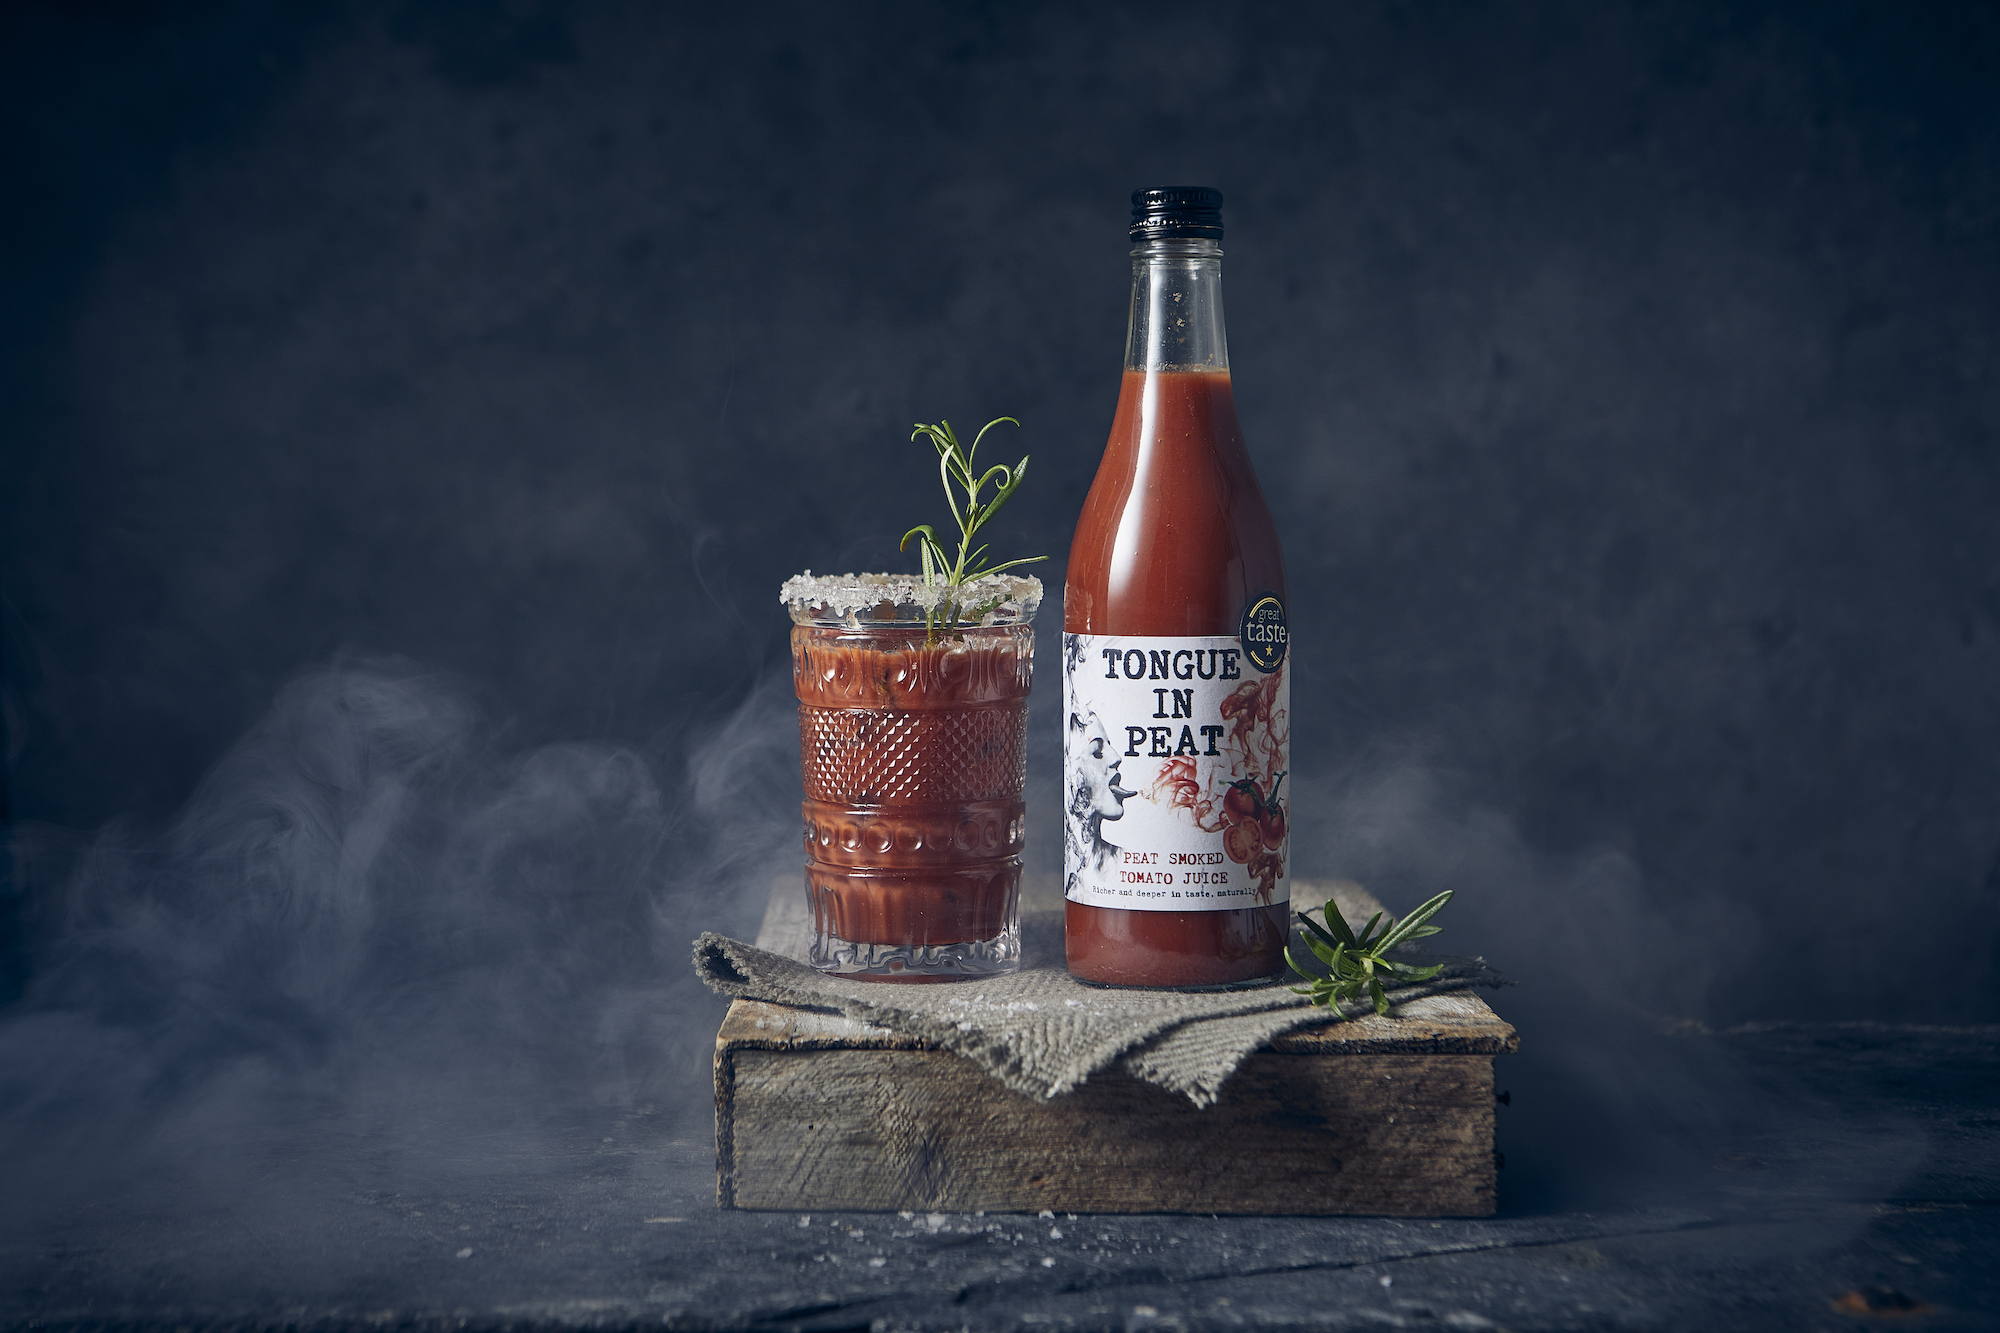 Ruby Capital invests £350k in Scottish cocktail mixer brand Tongue in Peat